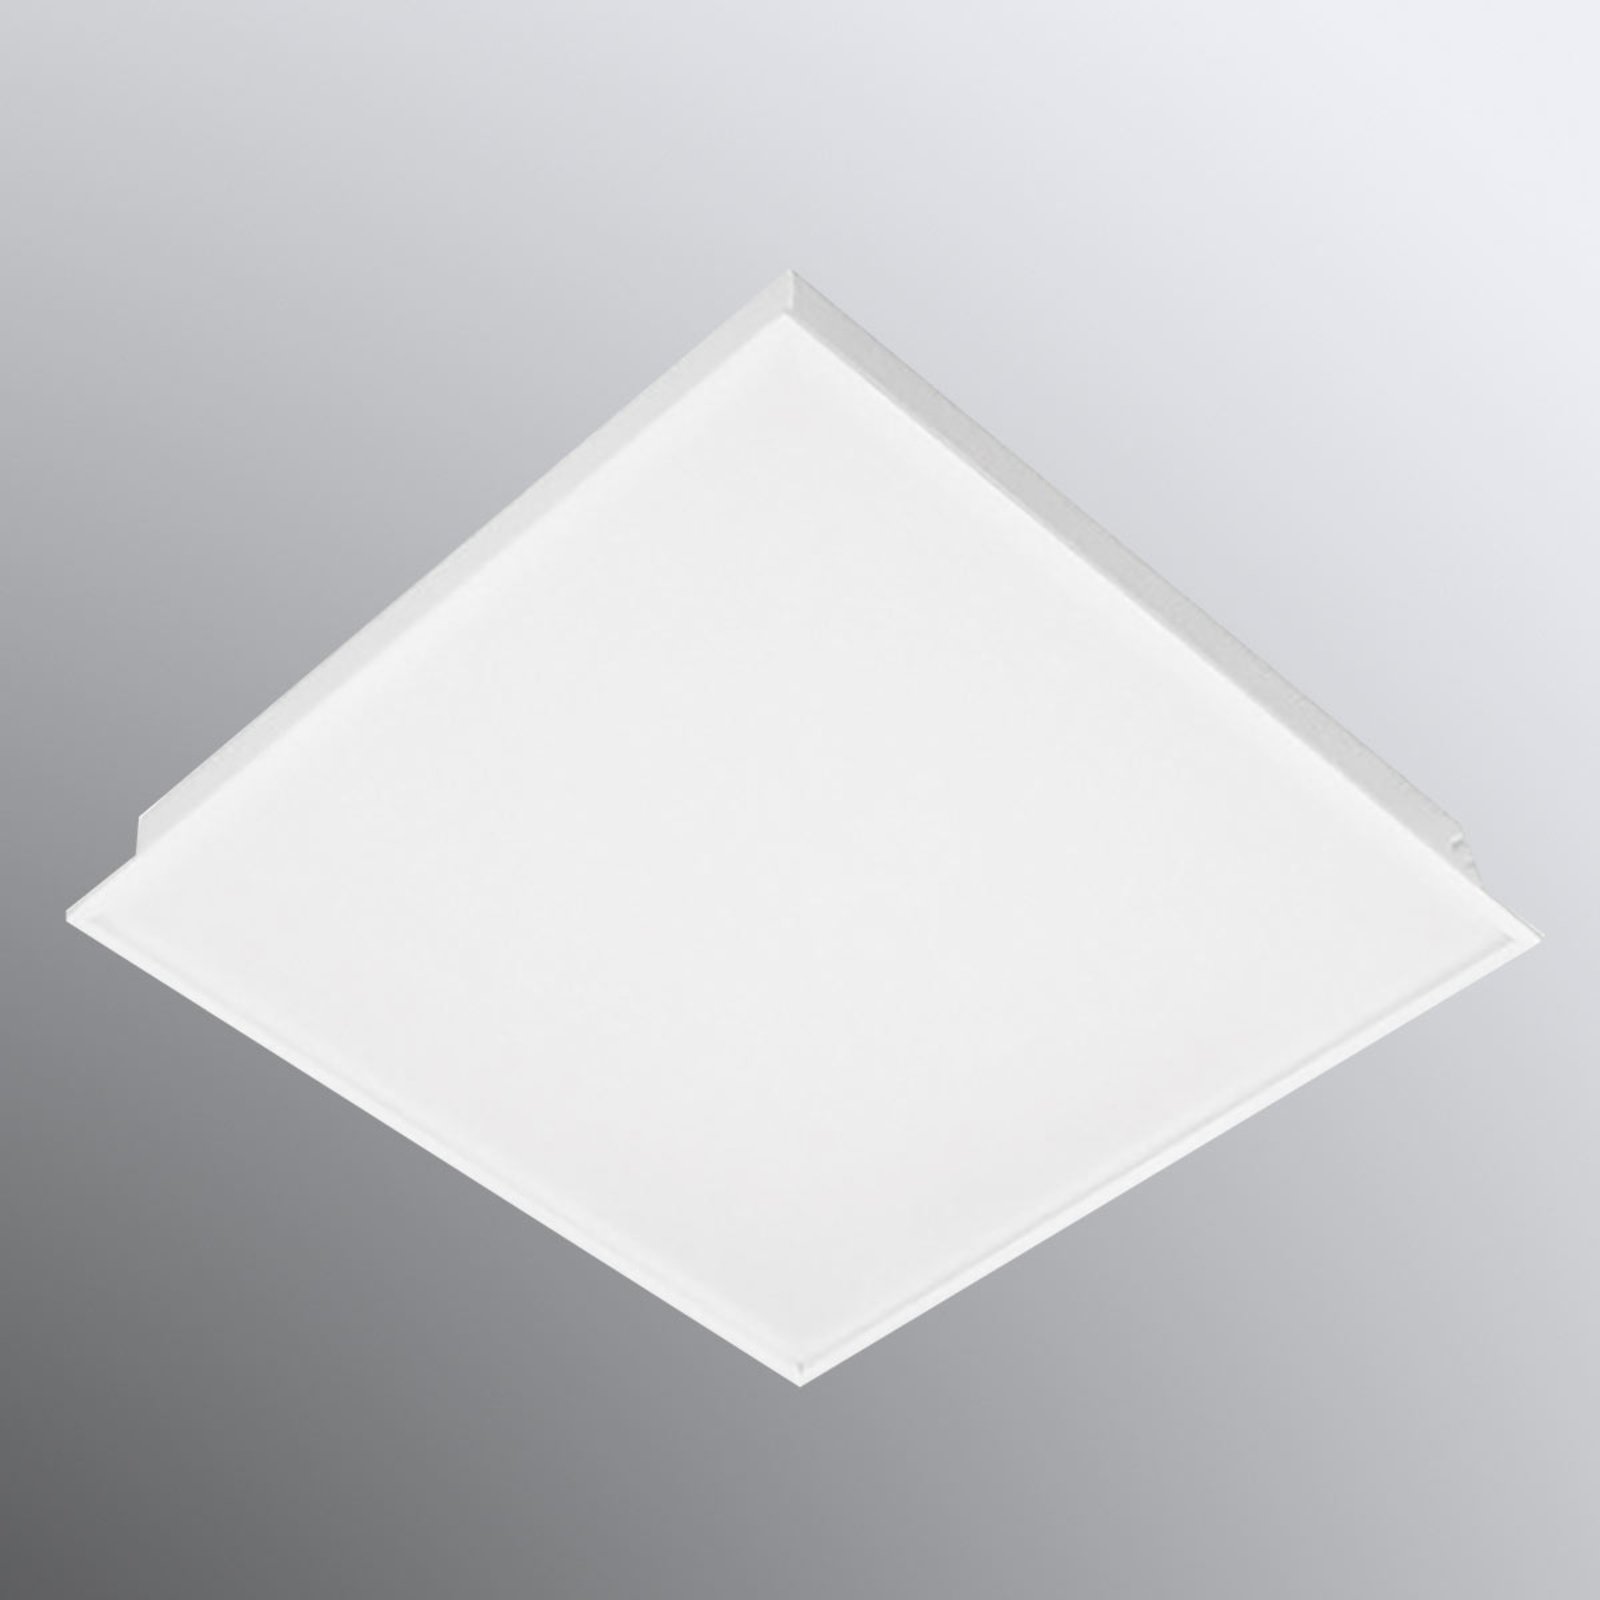 IBP LED troffer panel PMMA Cover, 32 W, 4,000K